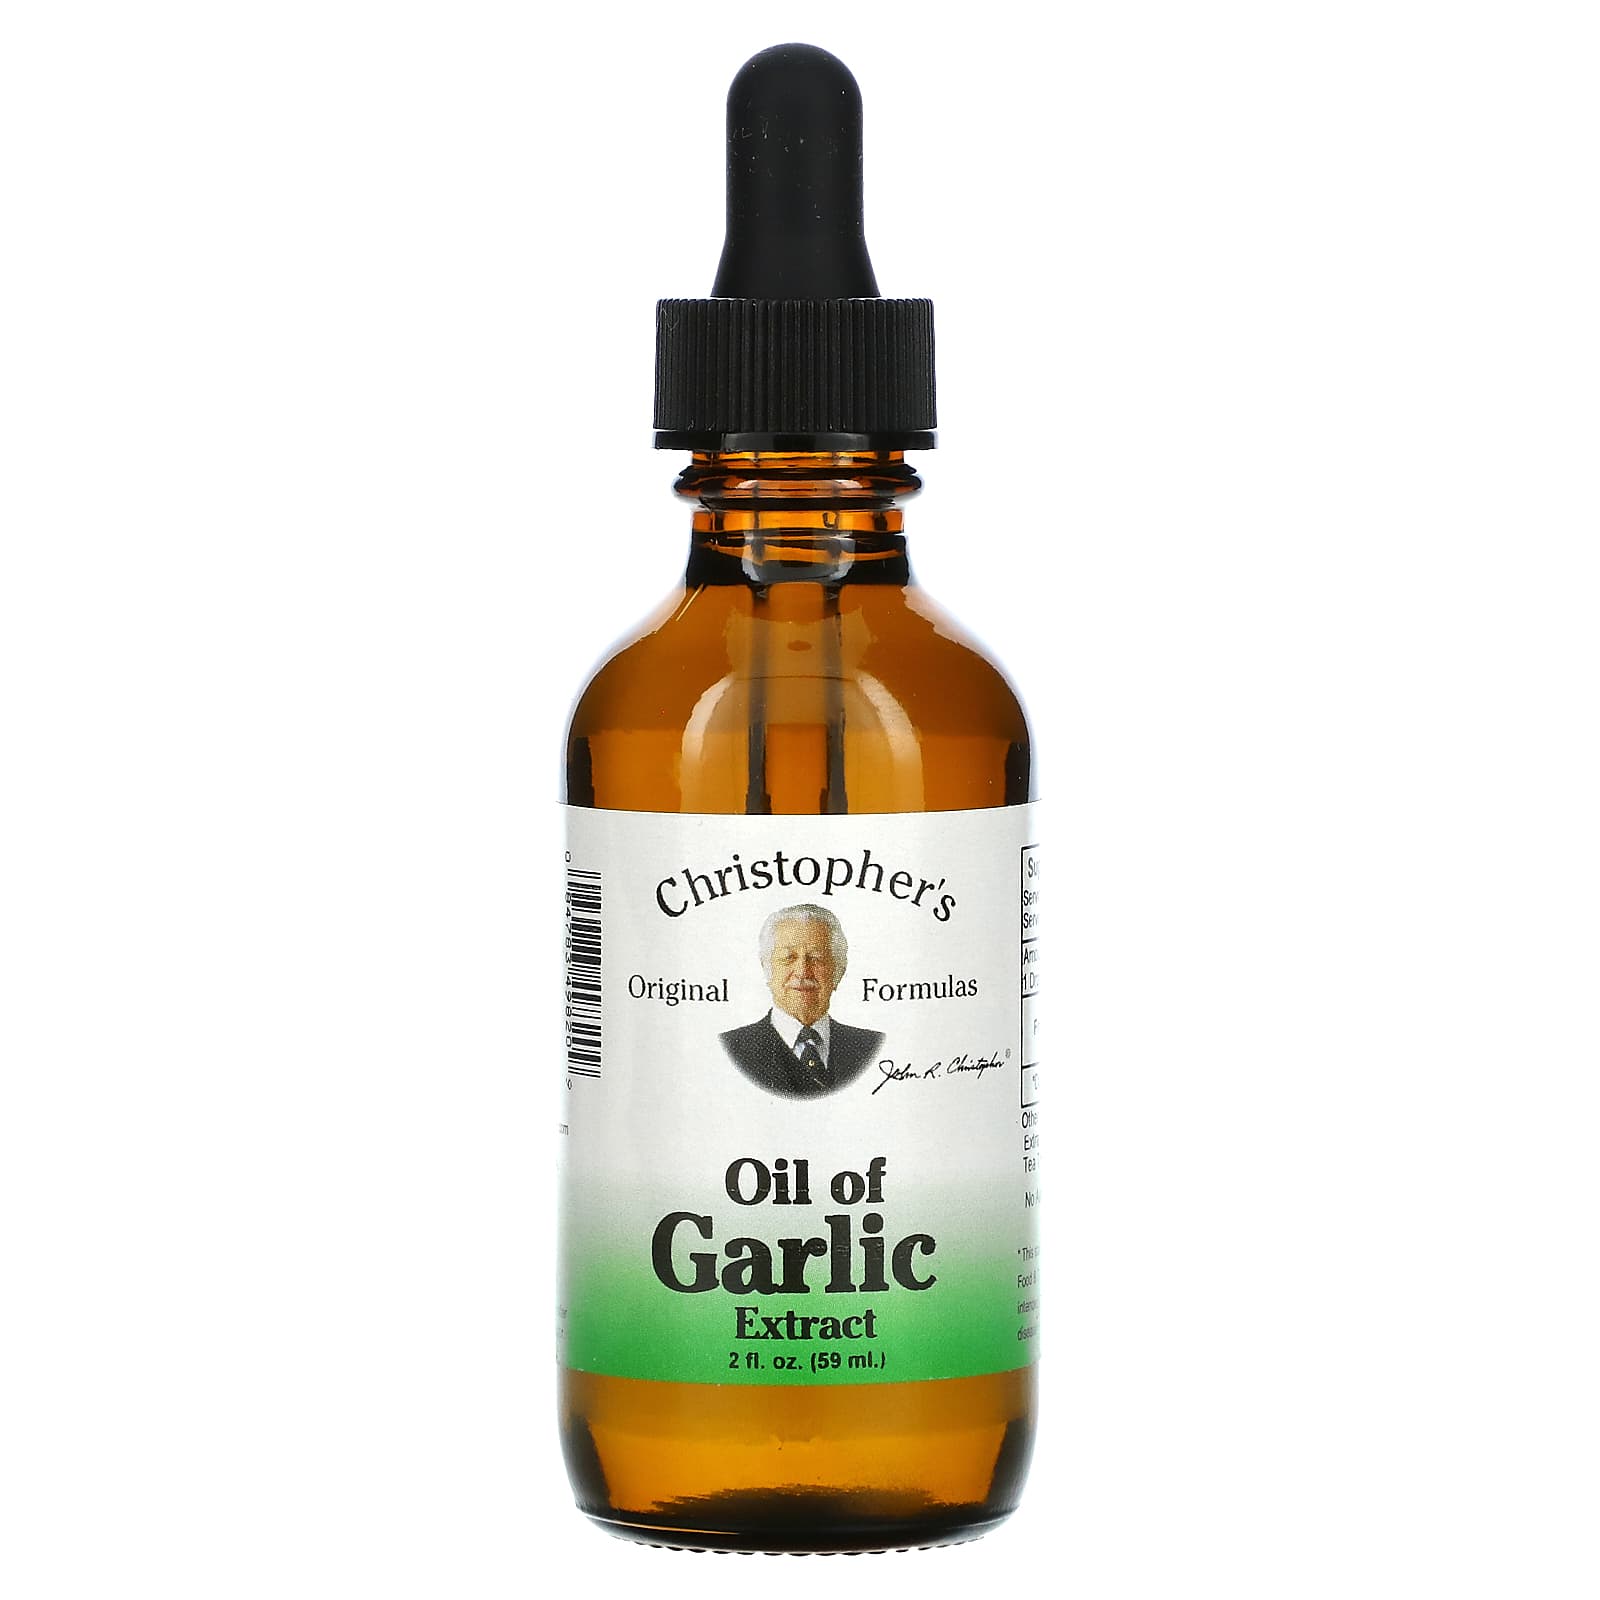 Oil of Garlic Extract